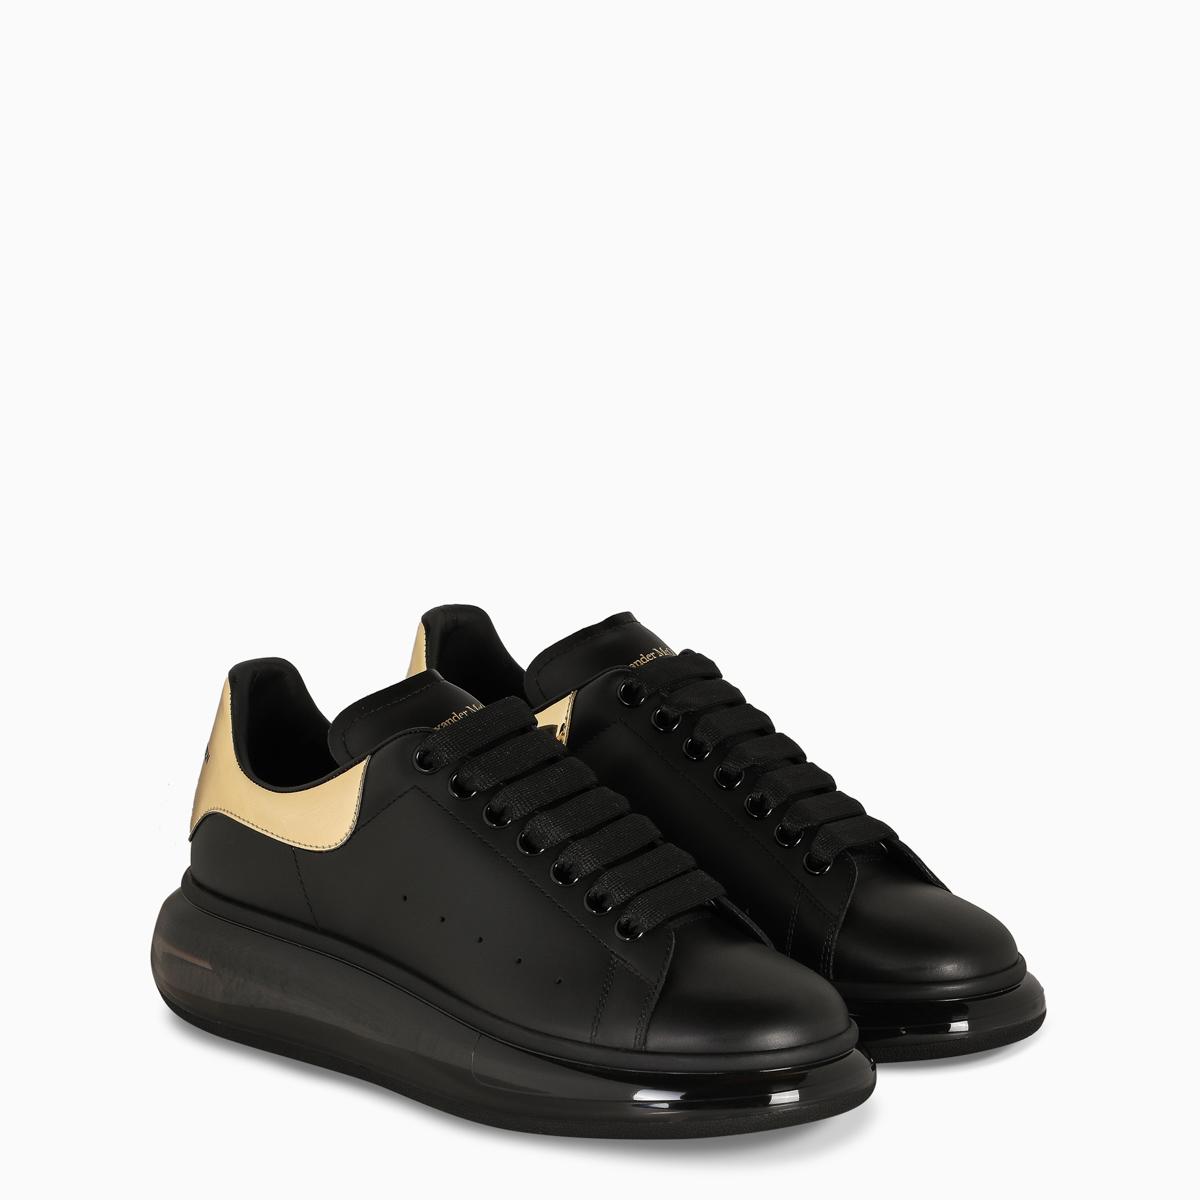 black and gold alexander mcqueen shoes